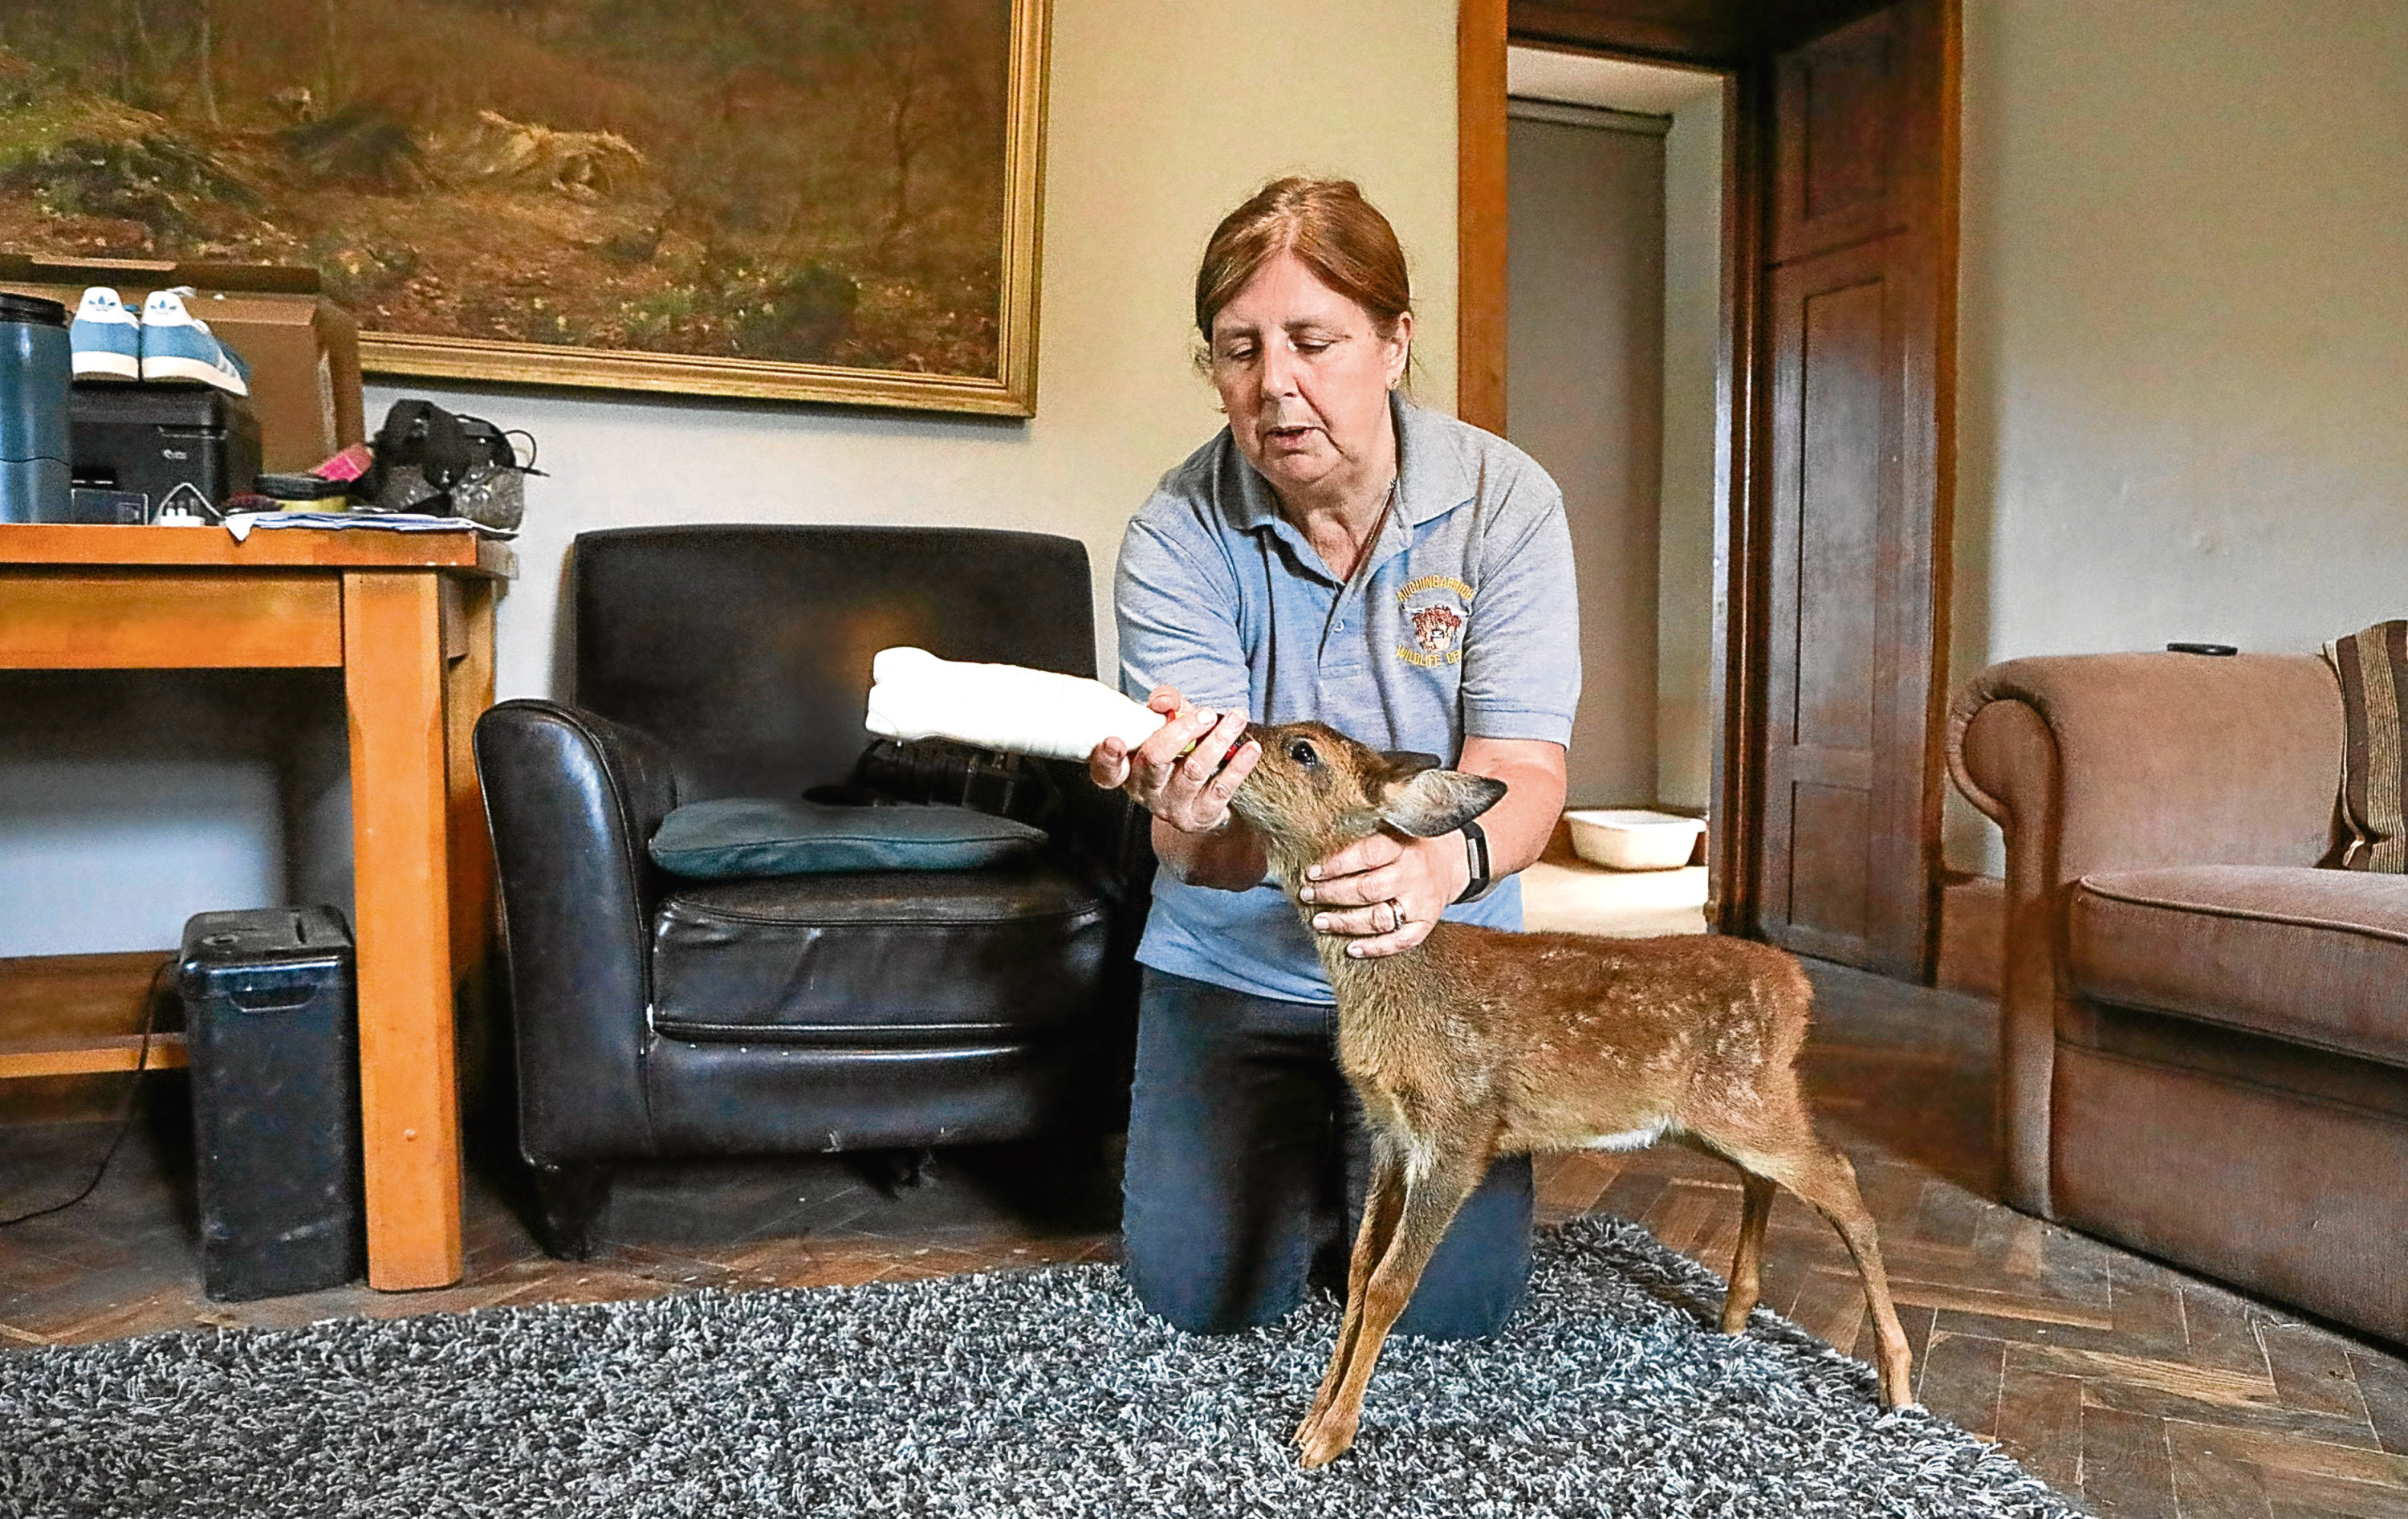 The family are raising the adorable deer fawn in their living room after it was rescued from the roadside.